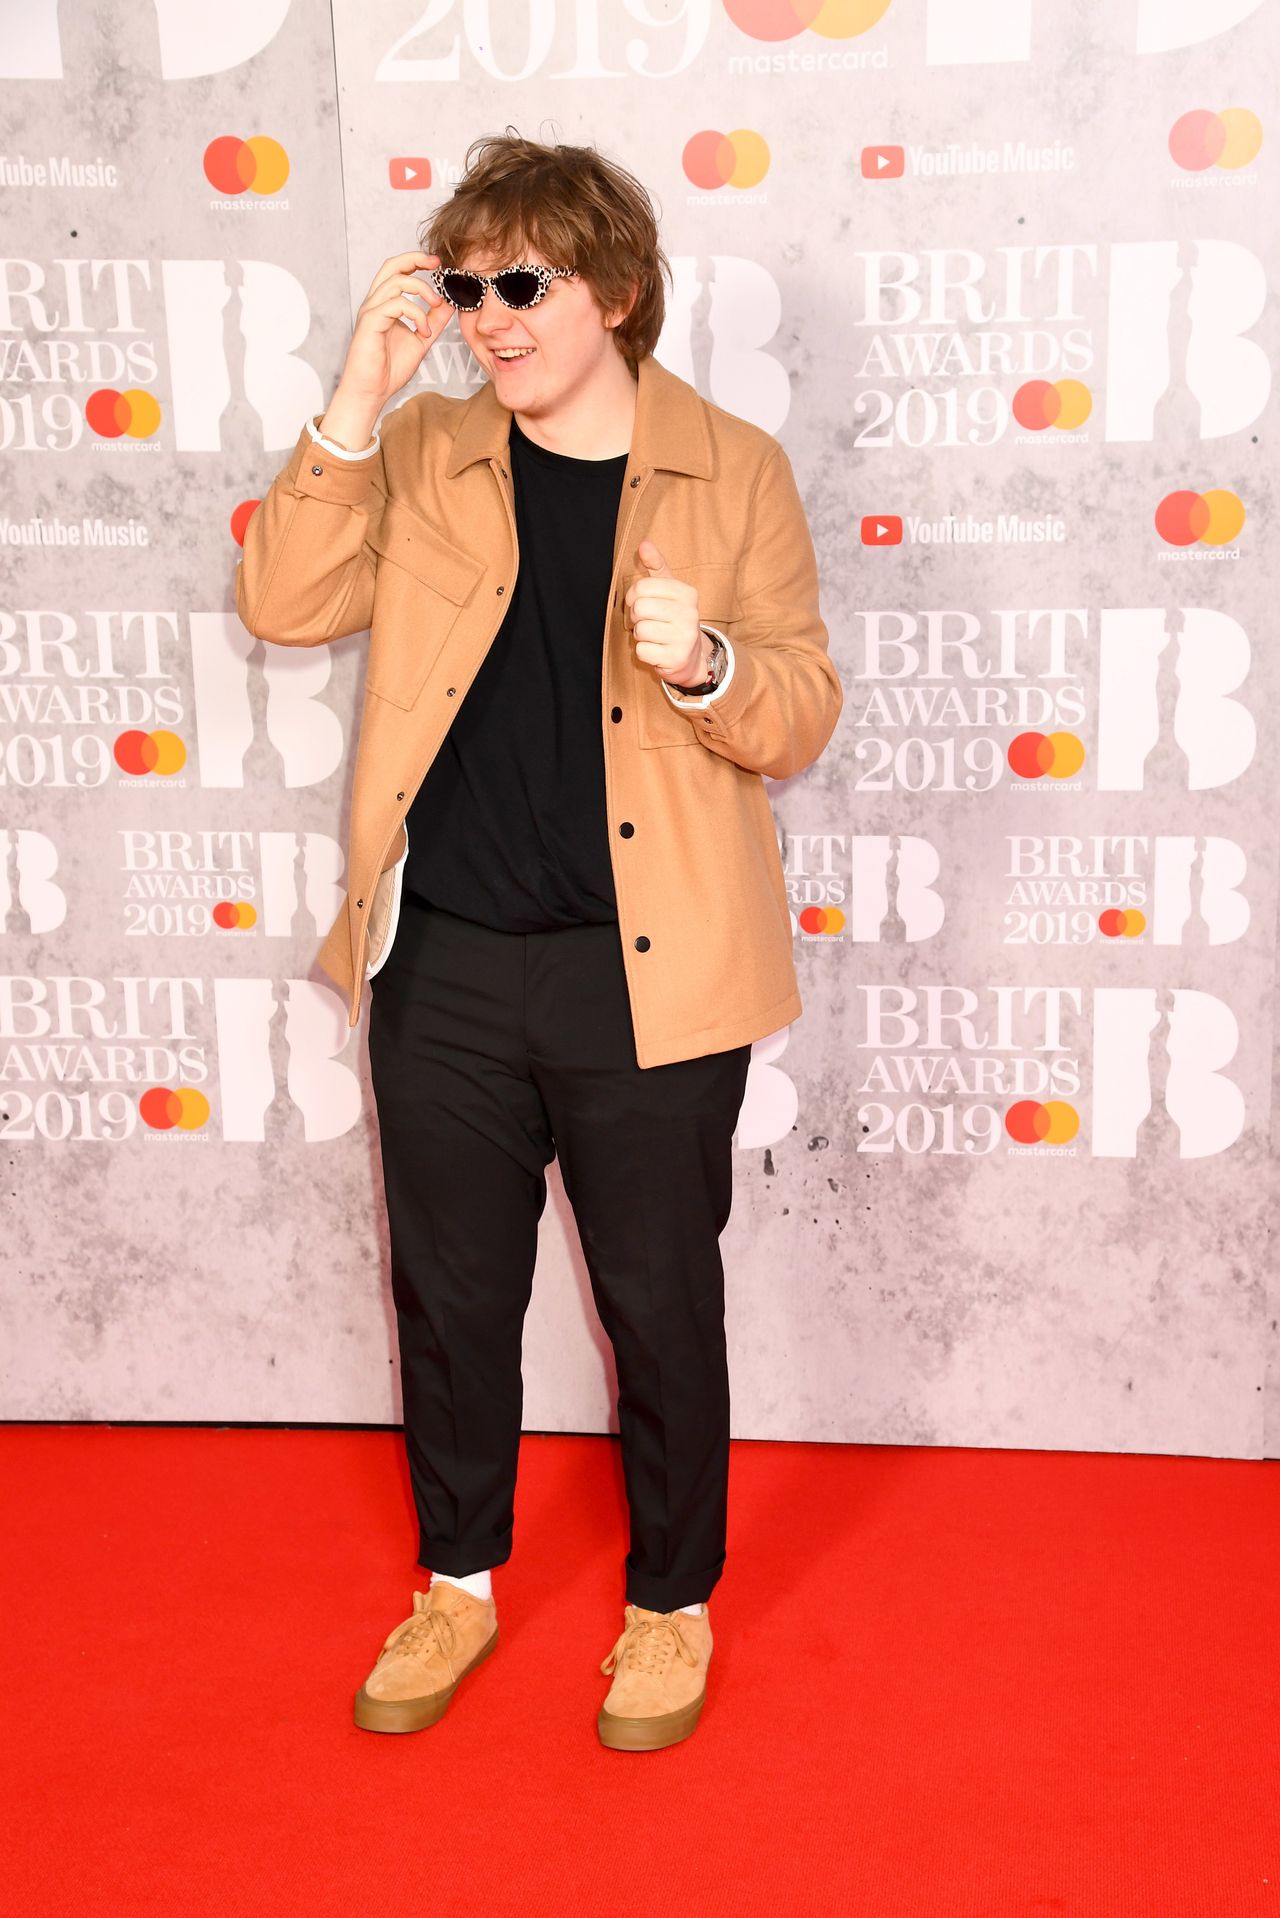 Lewis at the Brit Awards: "There was free booze, it was my scene."